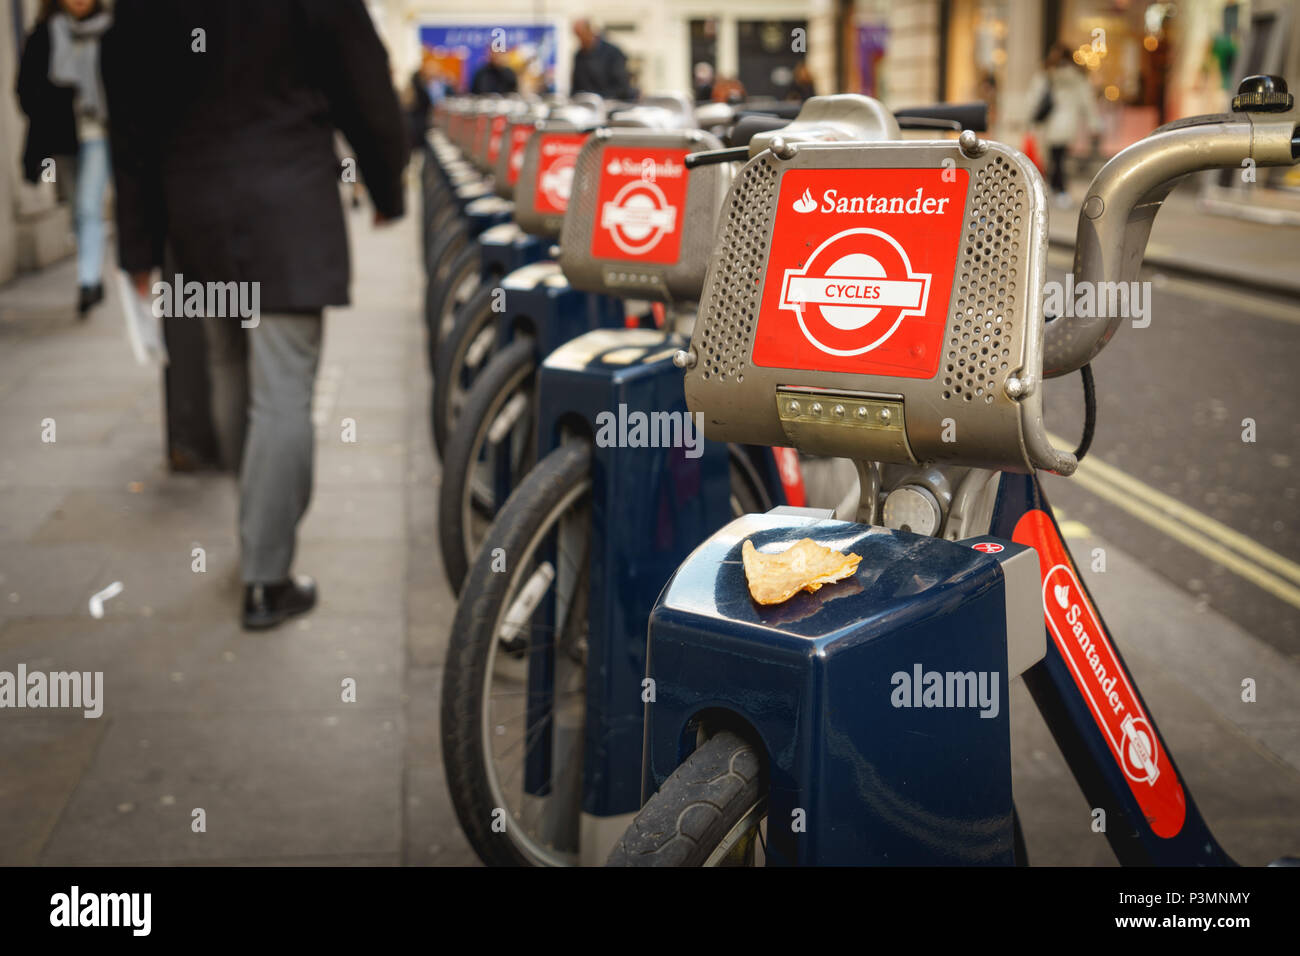 London, UK - November 2017. Santander Cycles bikes, also known as Boris bikes, in a docking station near Oxford Circus. Landscape format. Stock Photo